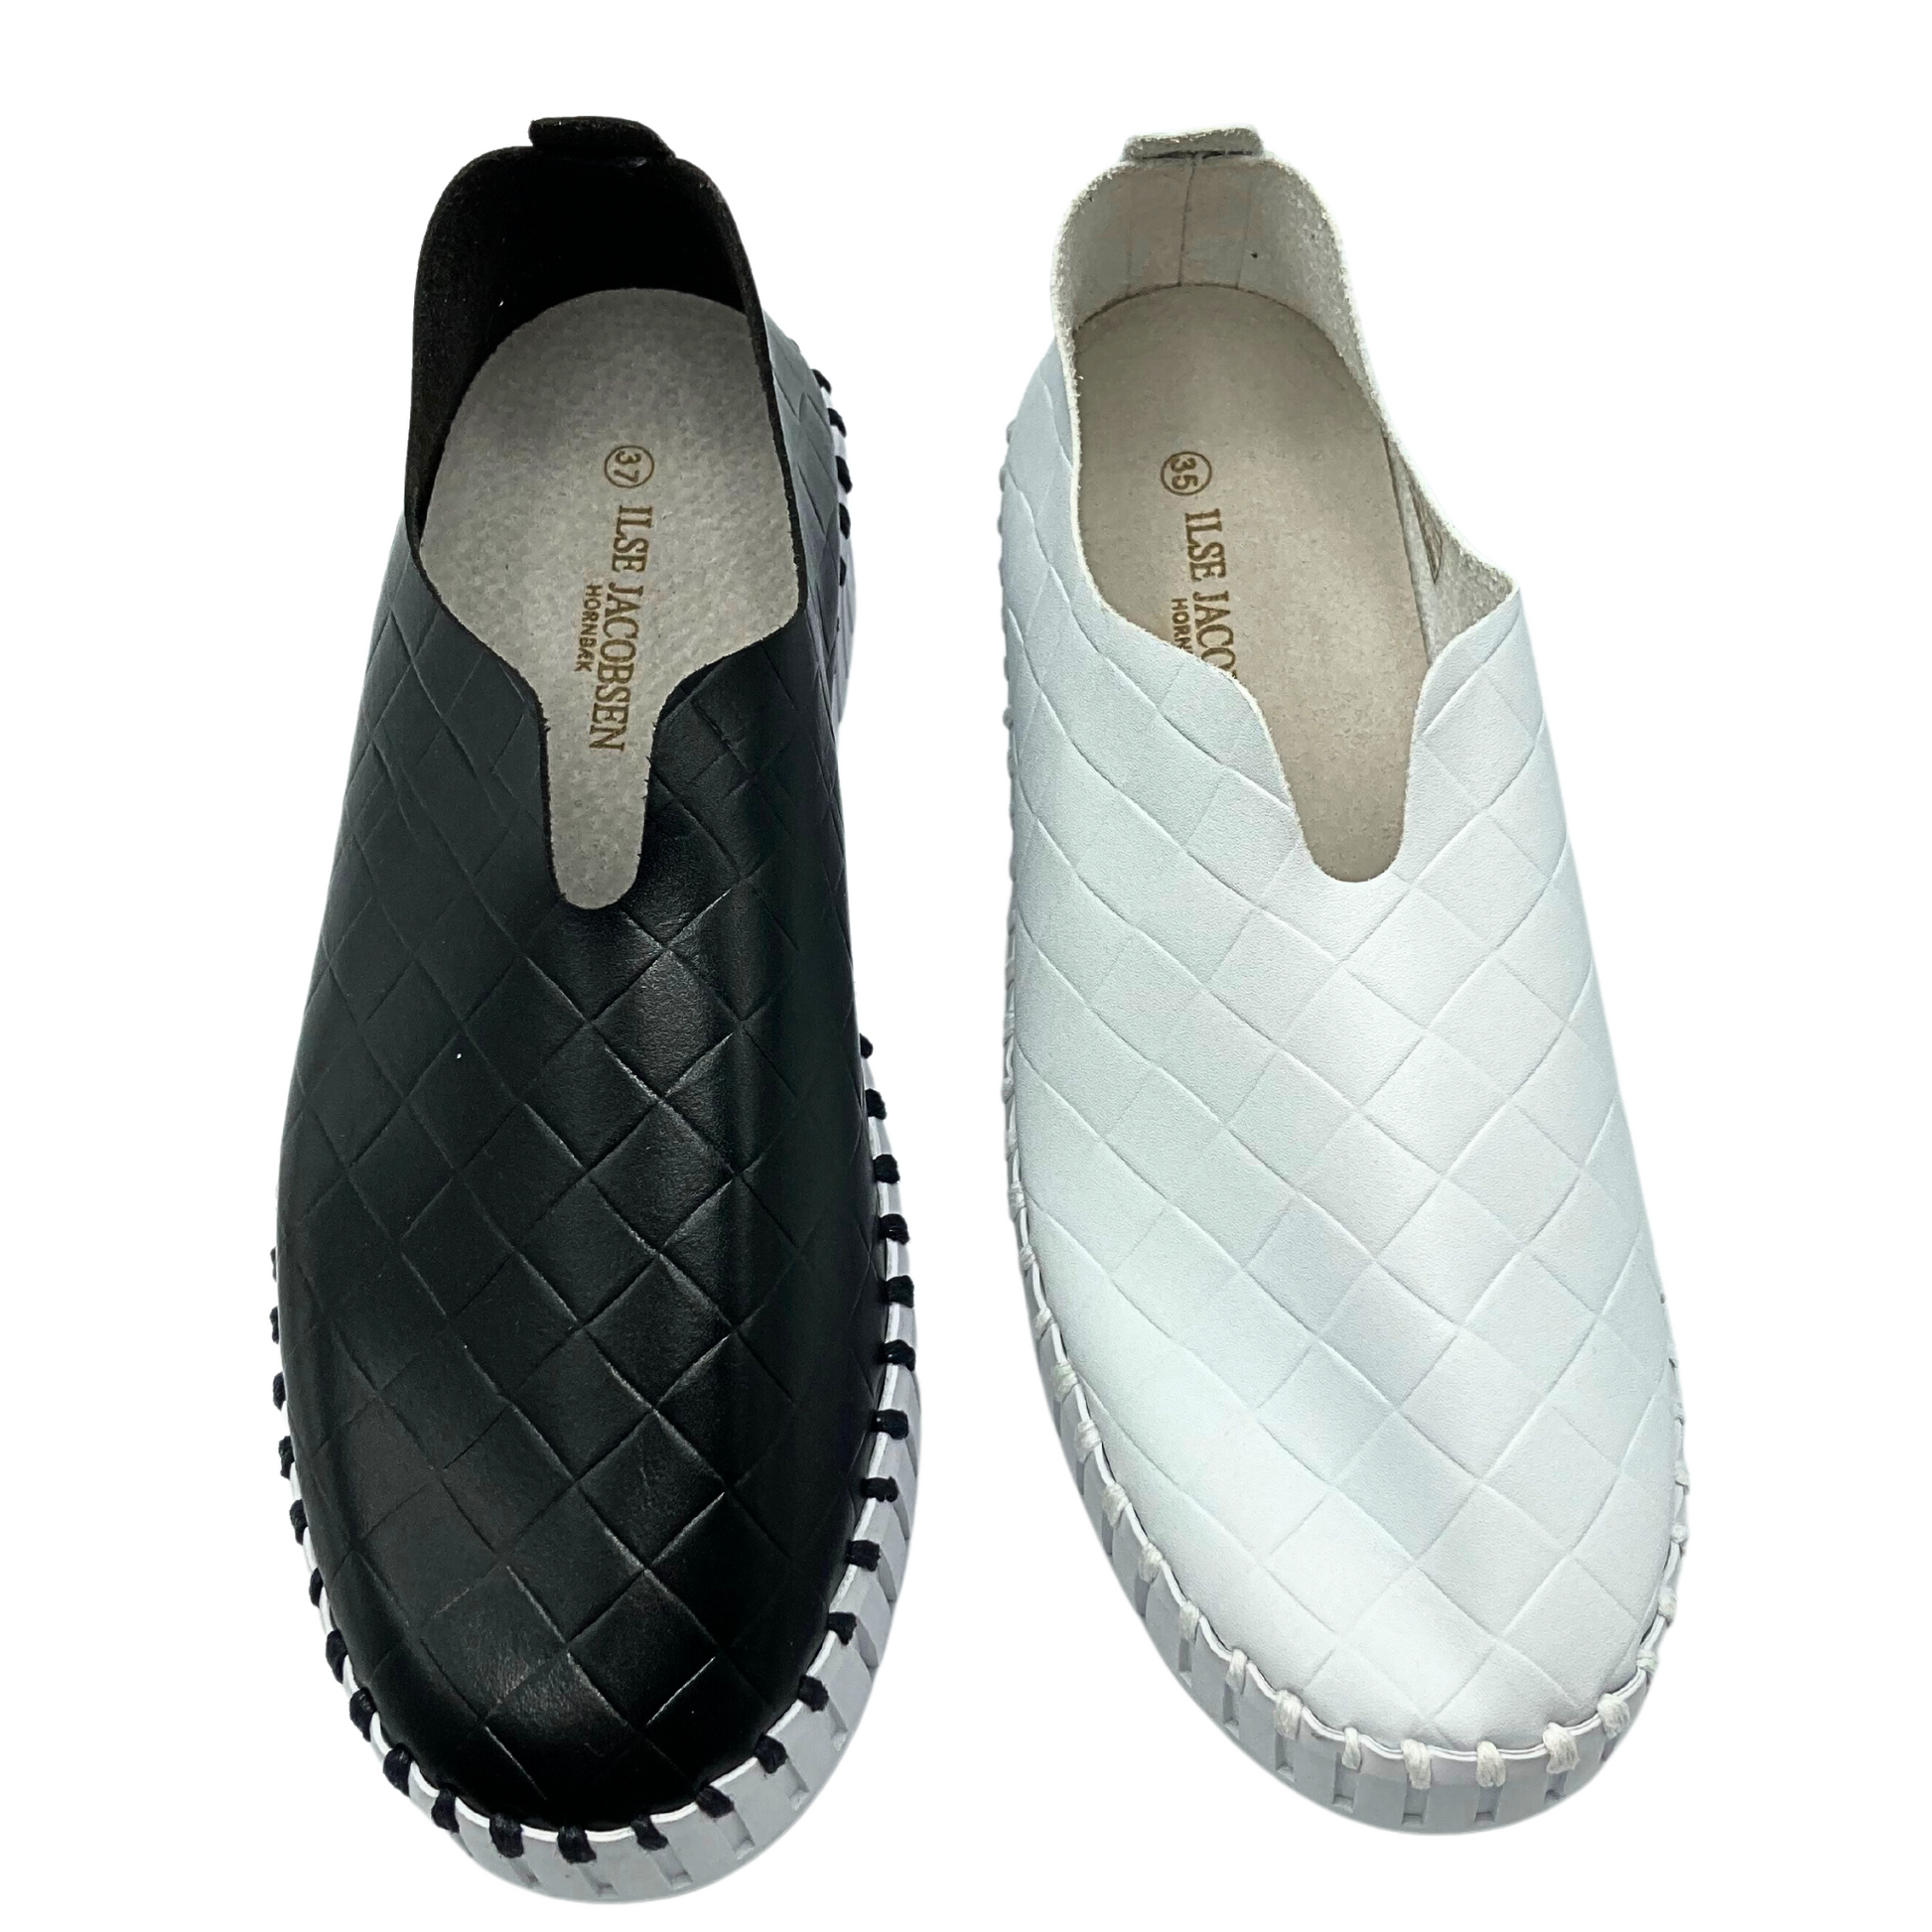 Top down view of slip on sneaker in black and white.  Leather lined on the inside and a man mande textile outside